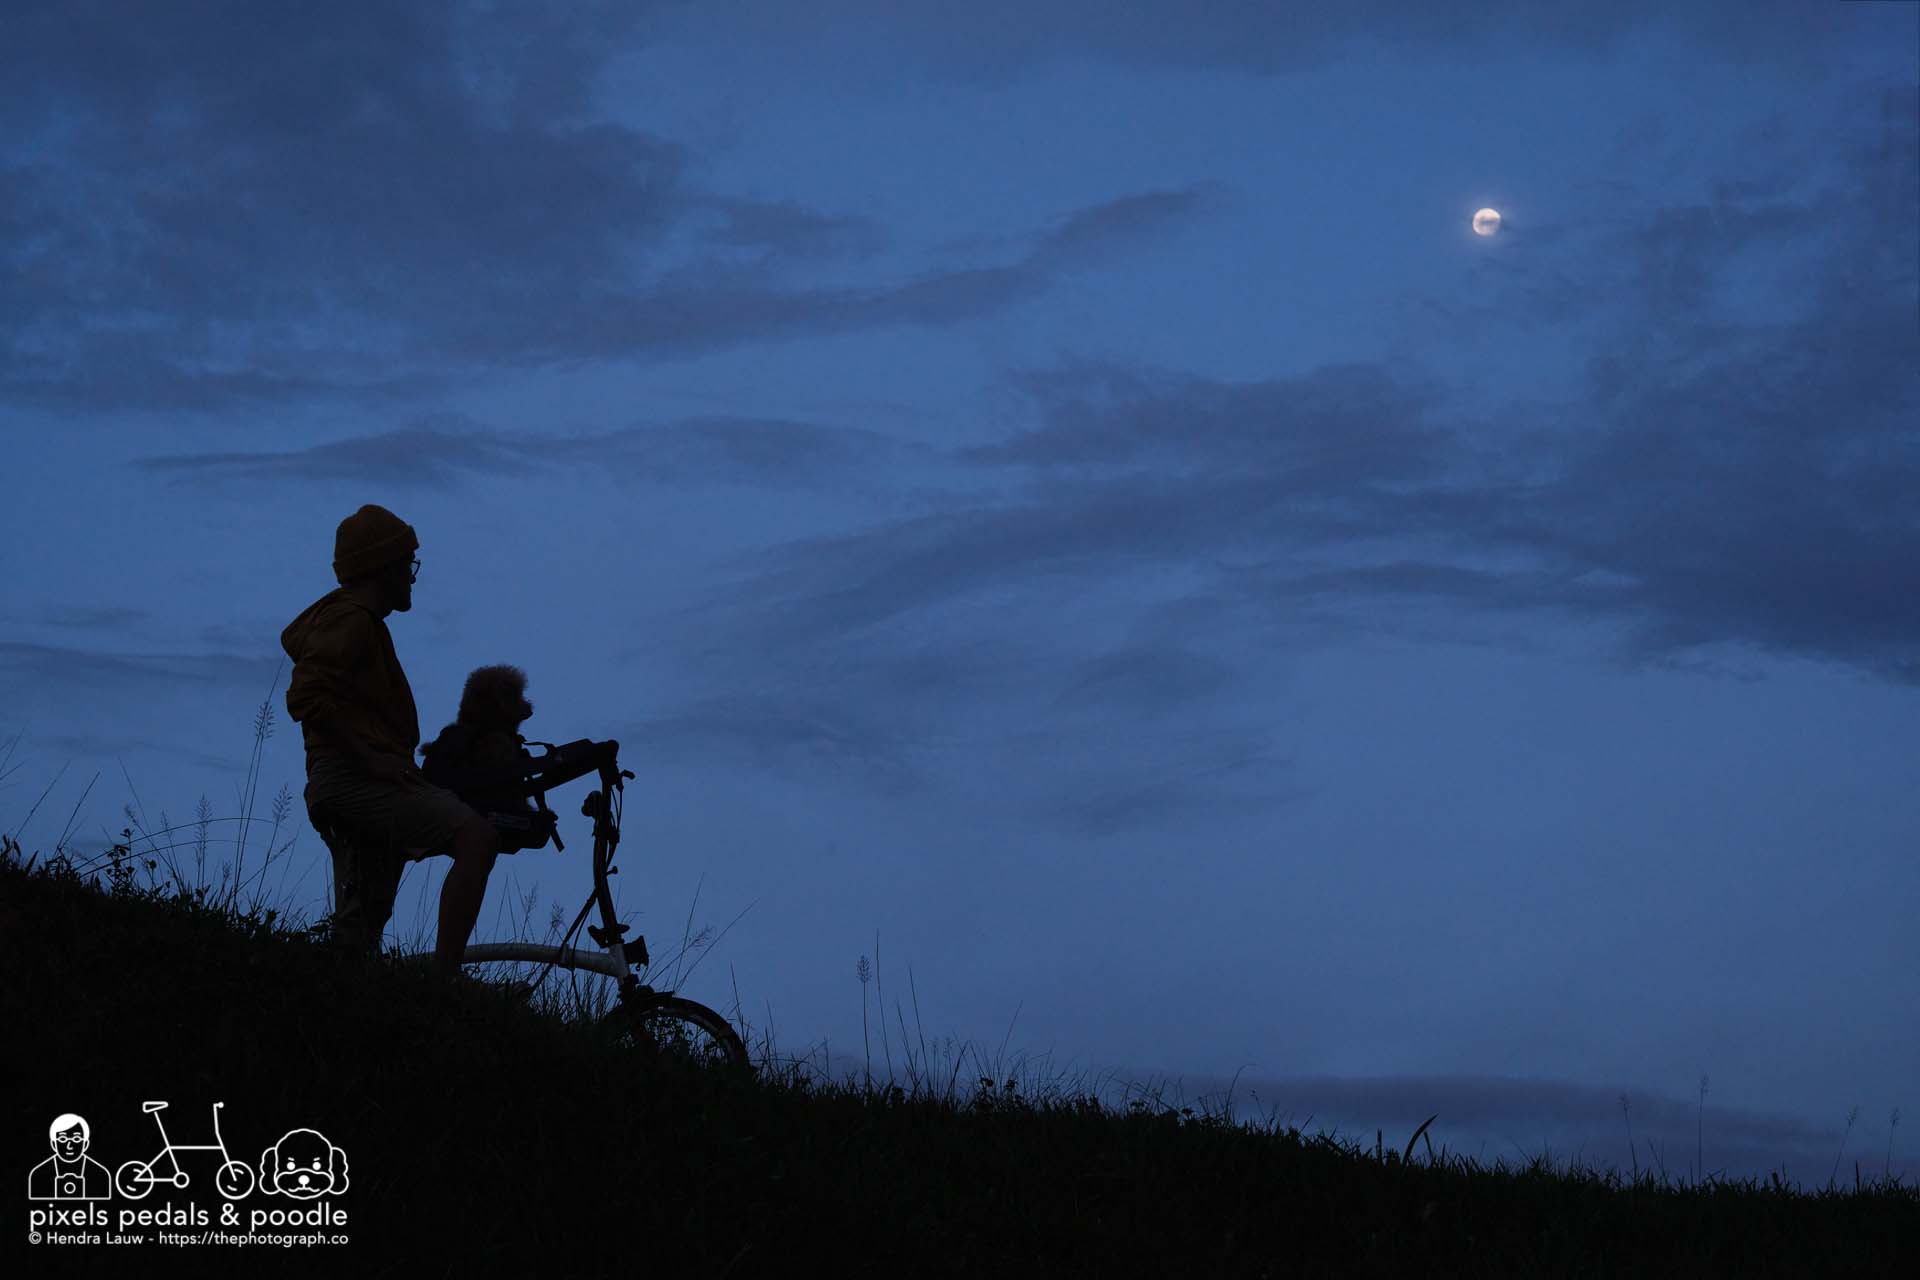 A cyclist and his poodle on a bike at dusk